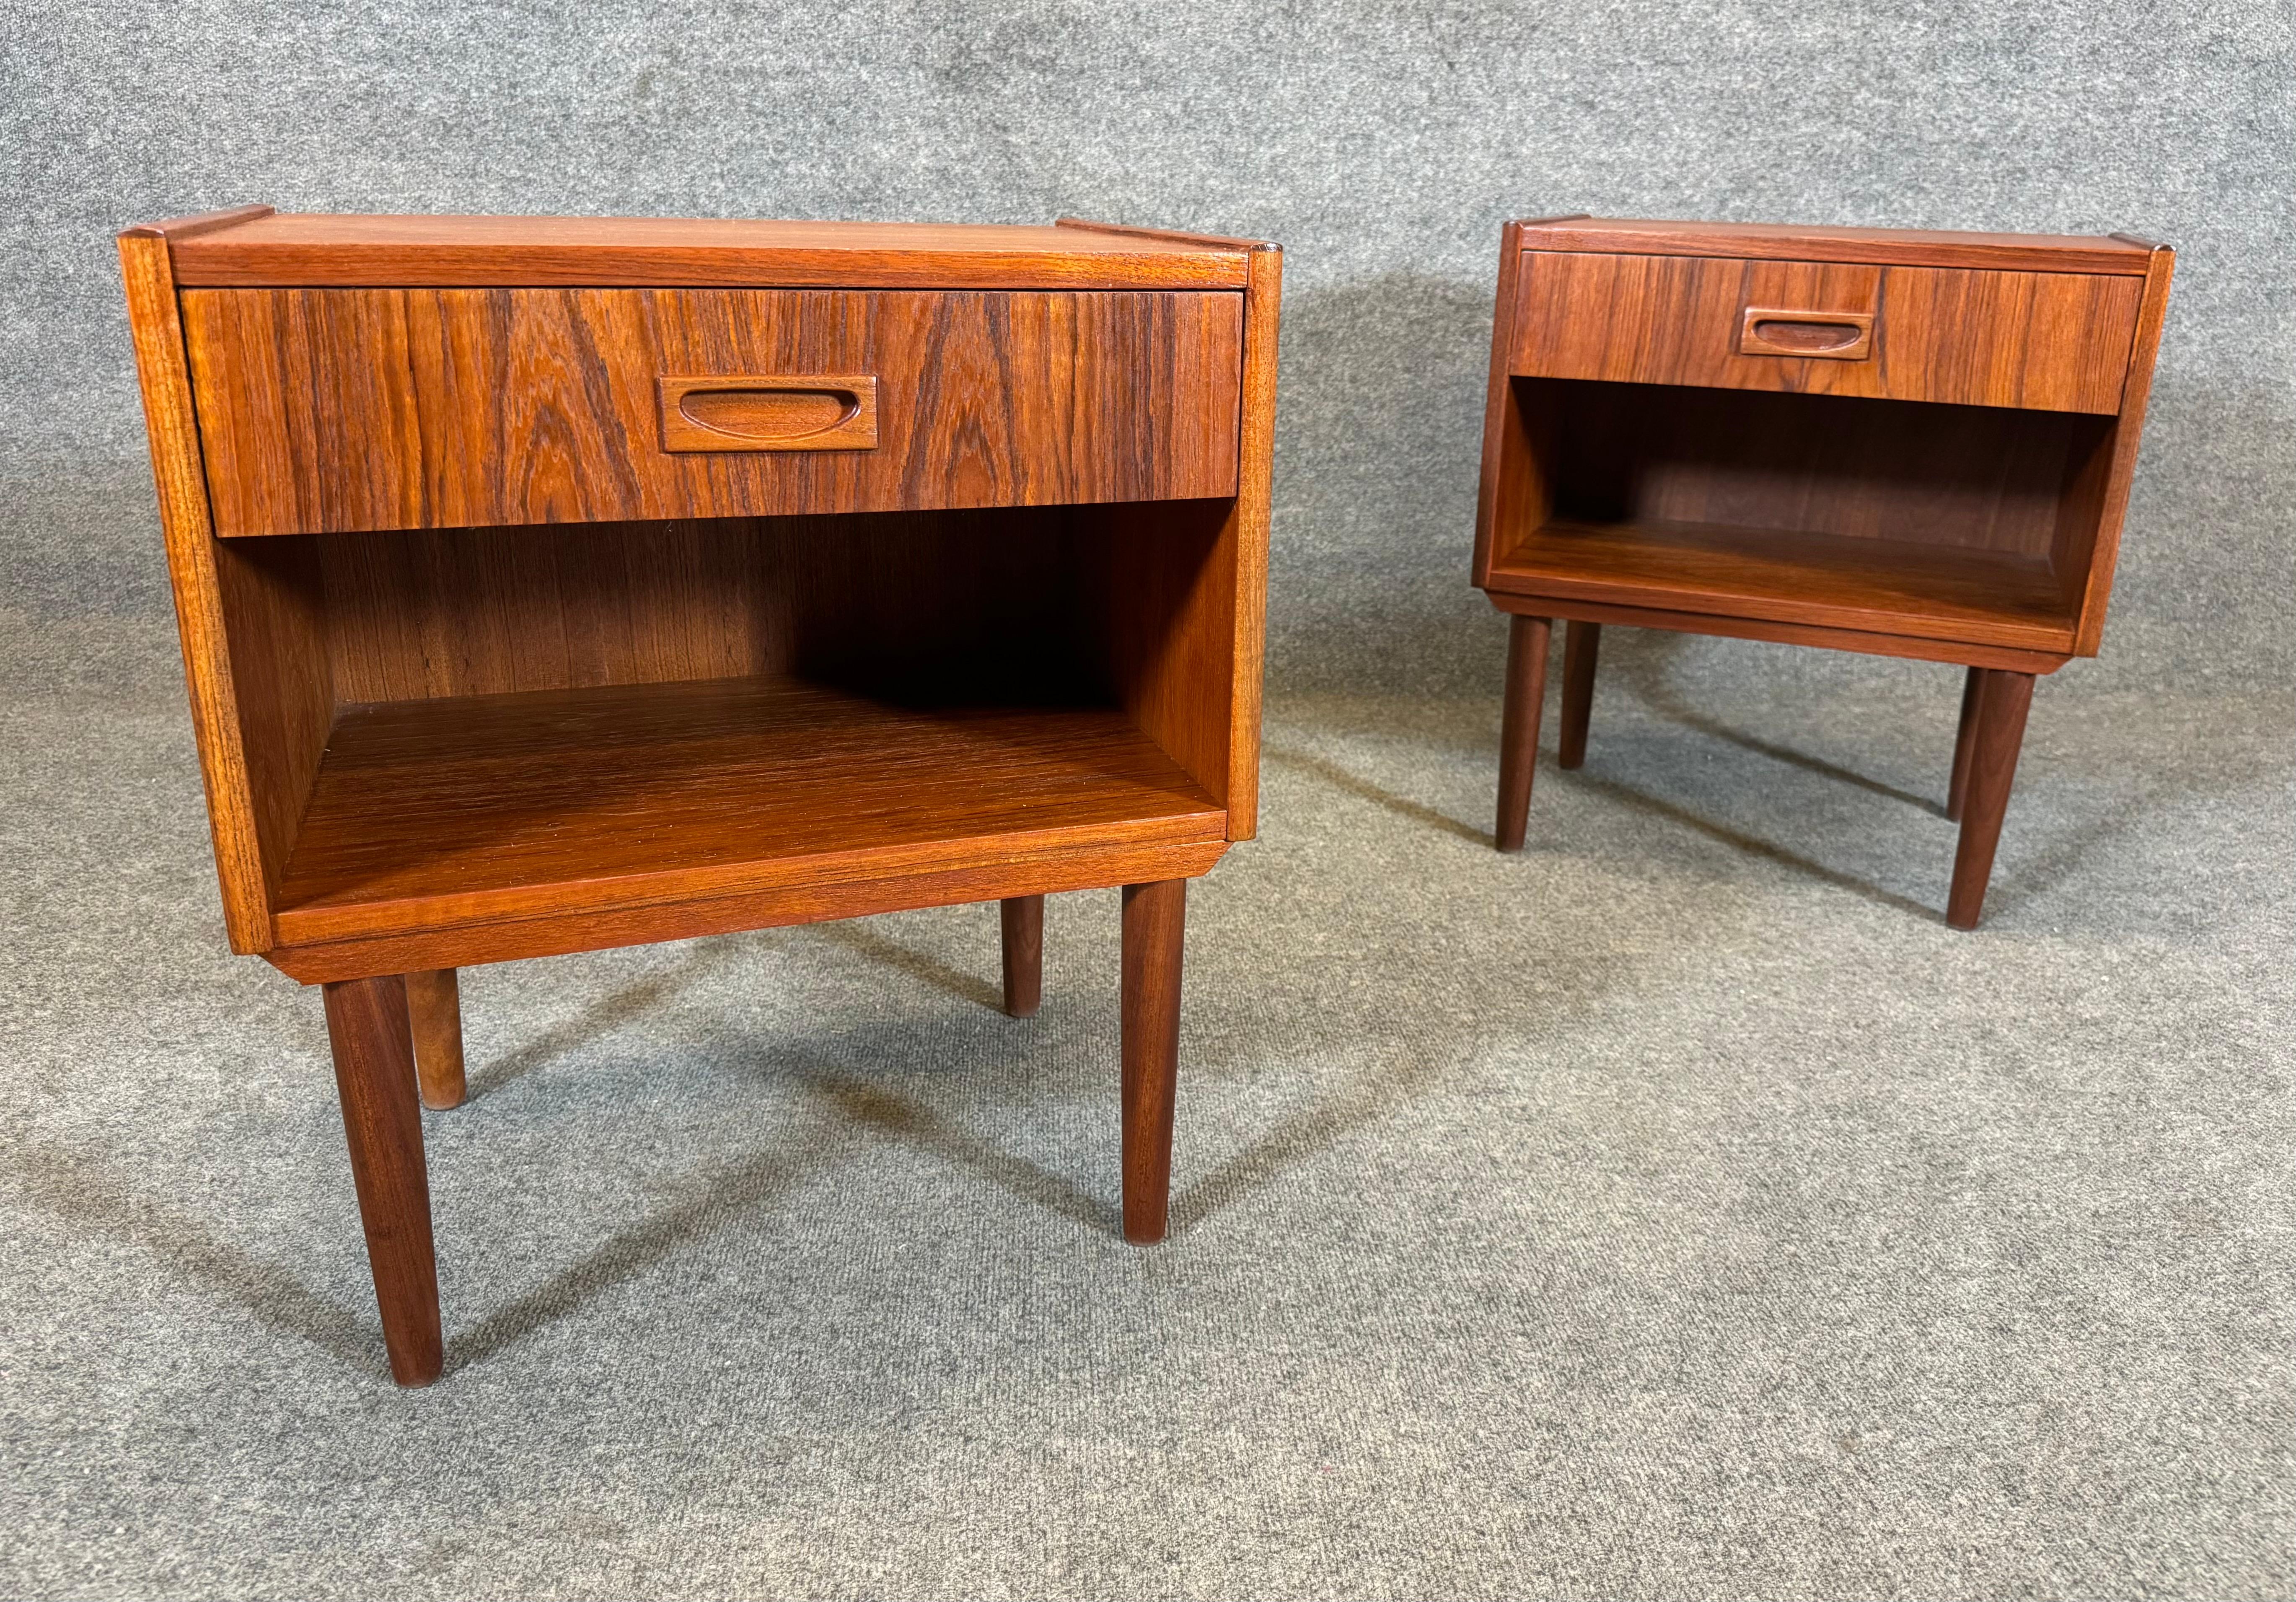 Here is a lovely set of two scandinavian modern nightstands manufactured in Denmark in the 1970's.
This pair, recently imported from Europe to California before its refinishing, features a vibrant wood grain, a single drawer with recessed pull, a